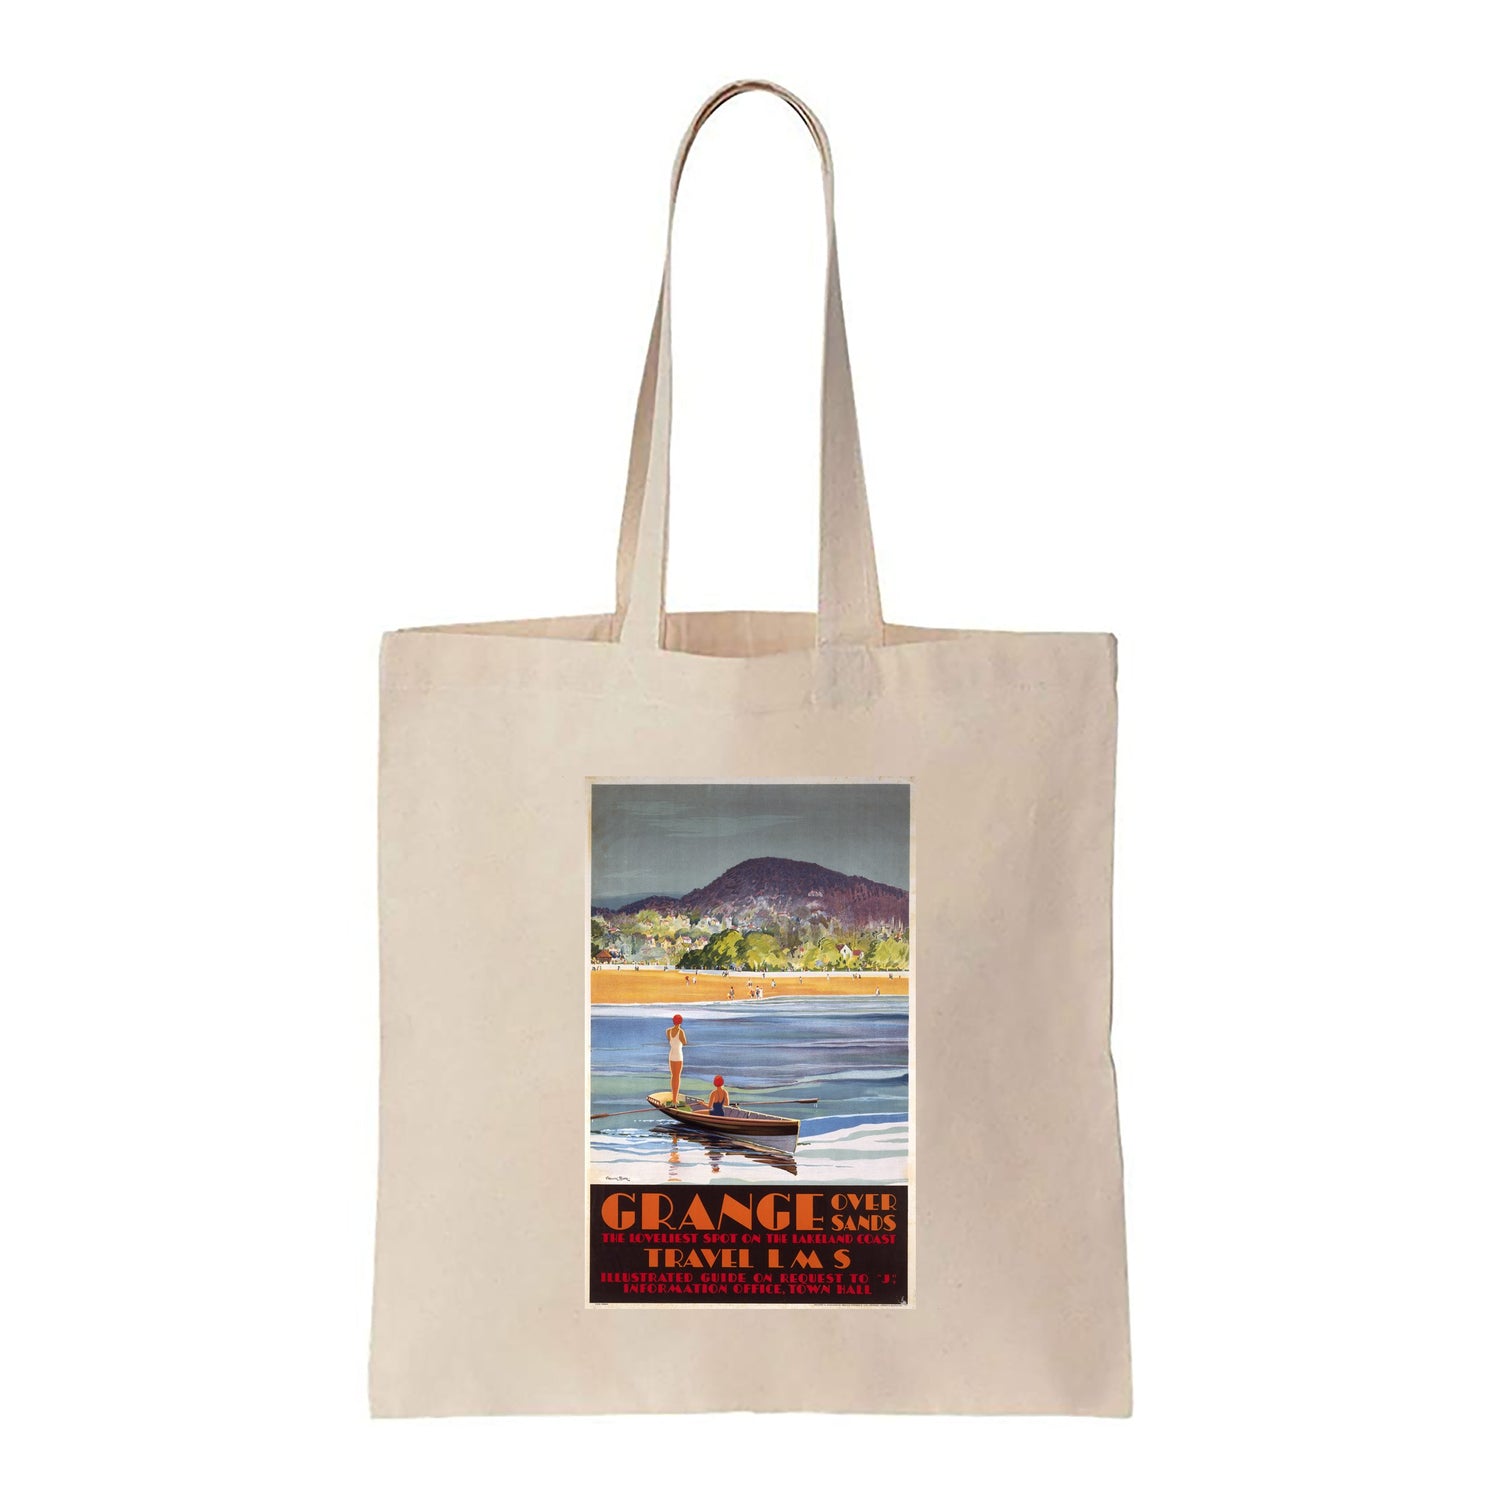 Grange Over Sands, the loveliest spot of the lakeland coast - Canvas Tote Bag